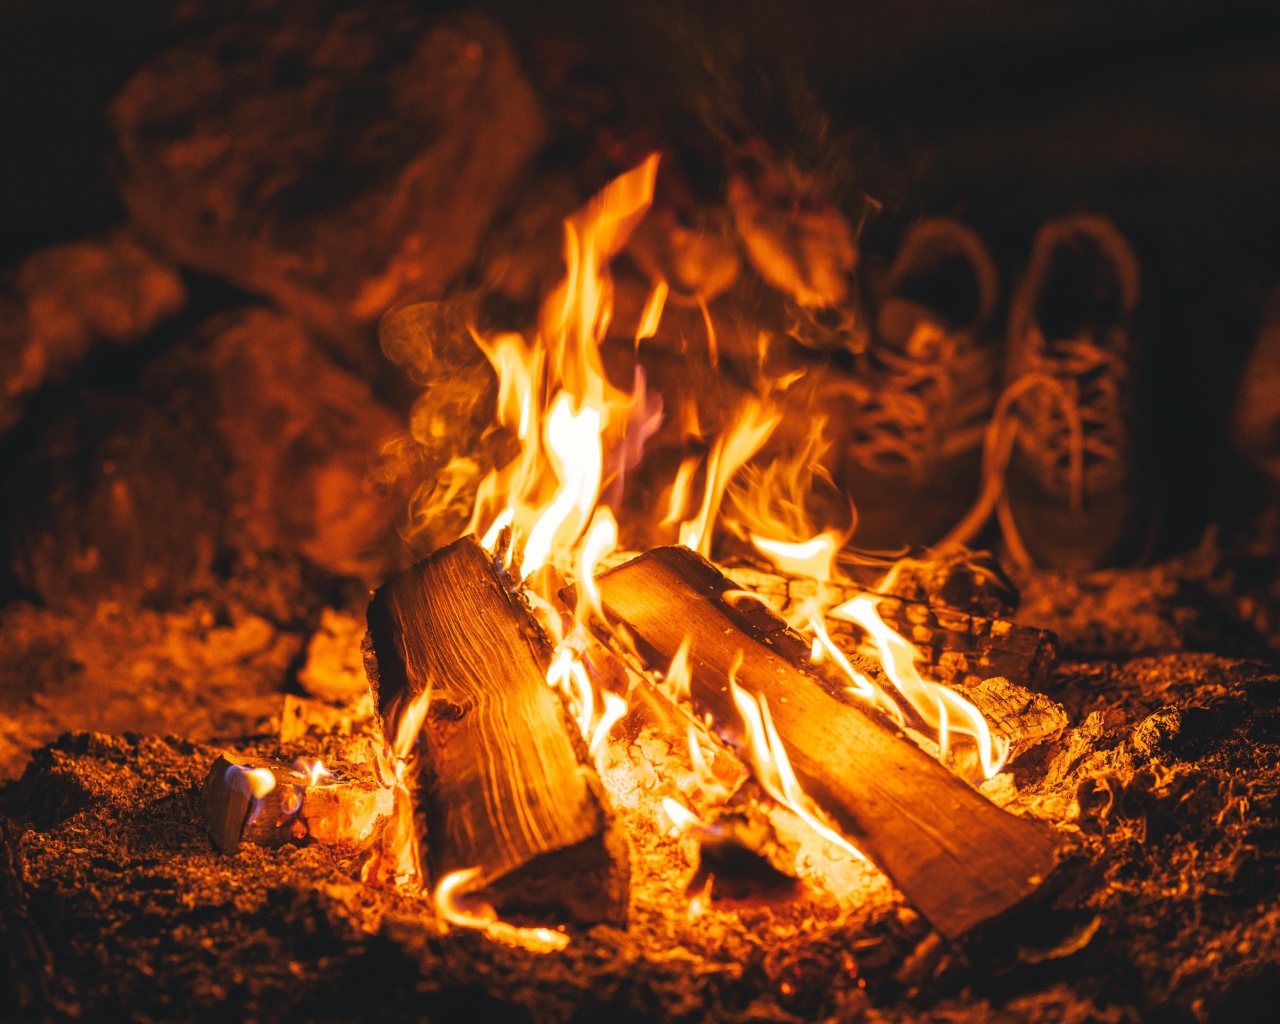 Firewood lies in the bright fire of a fire